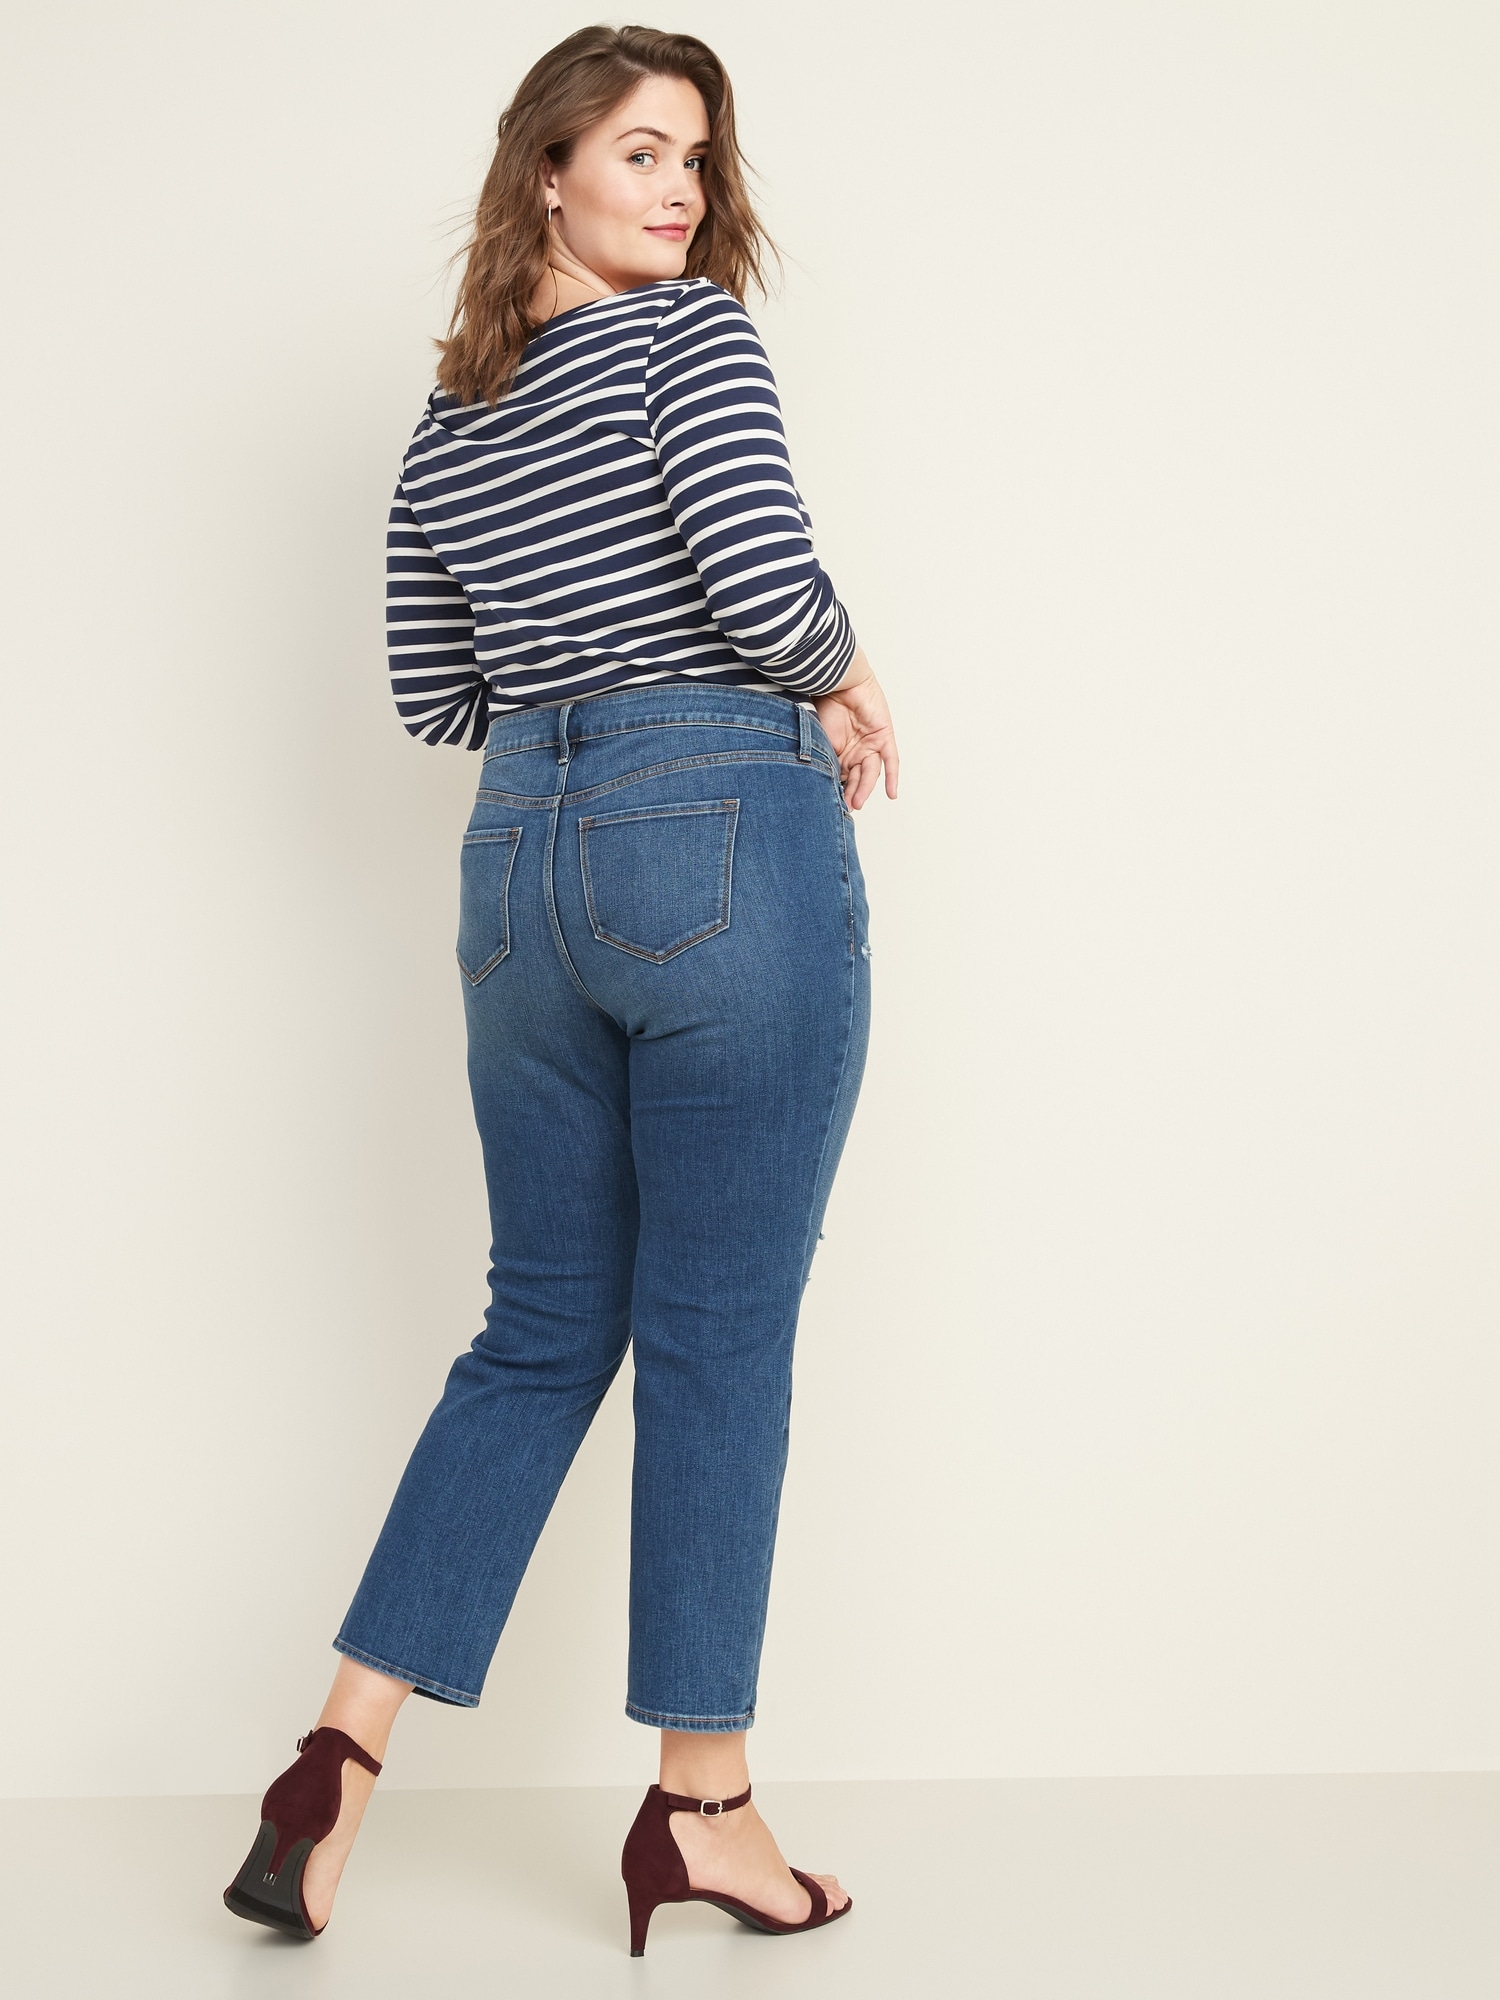 Mid-Rise Power Slim Straight Jeans for Women, Old Navy